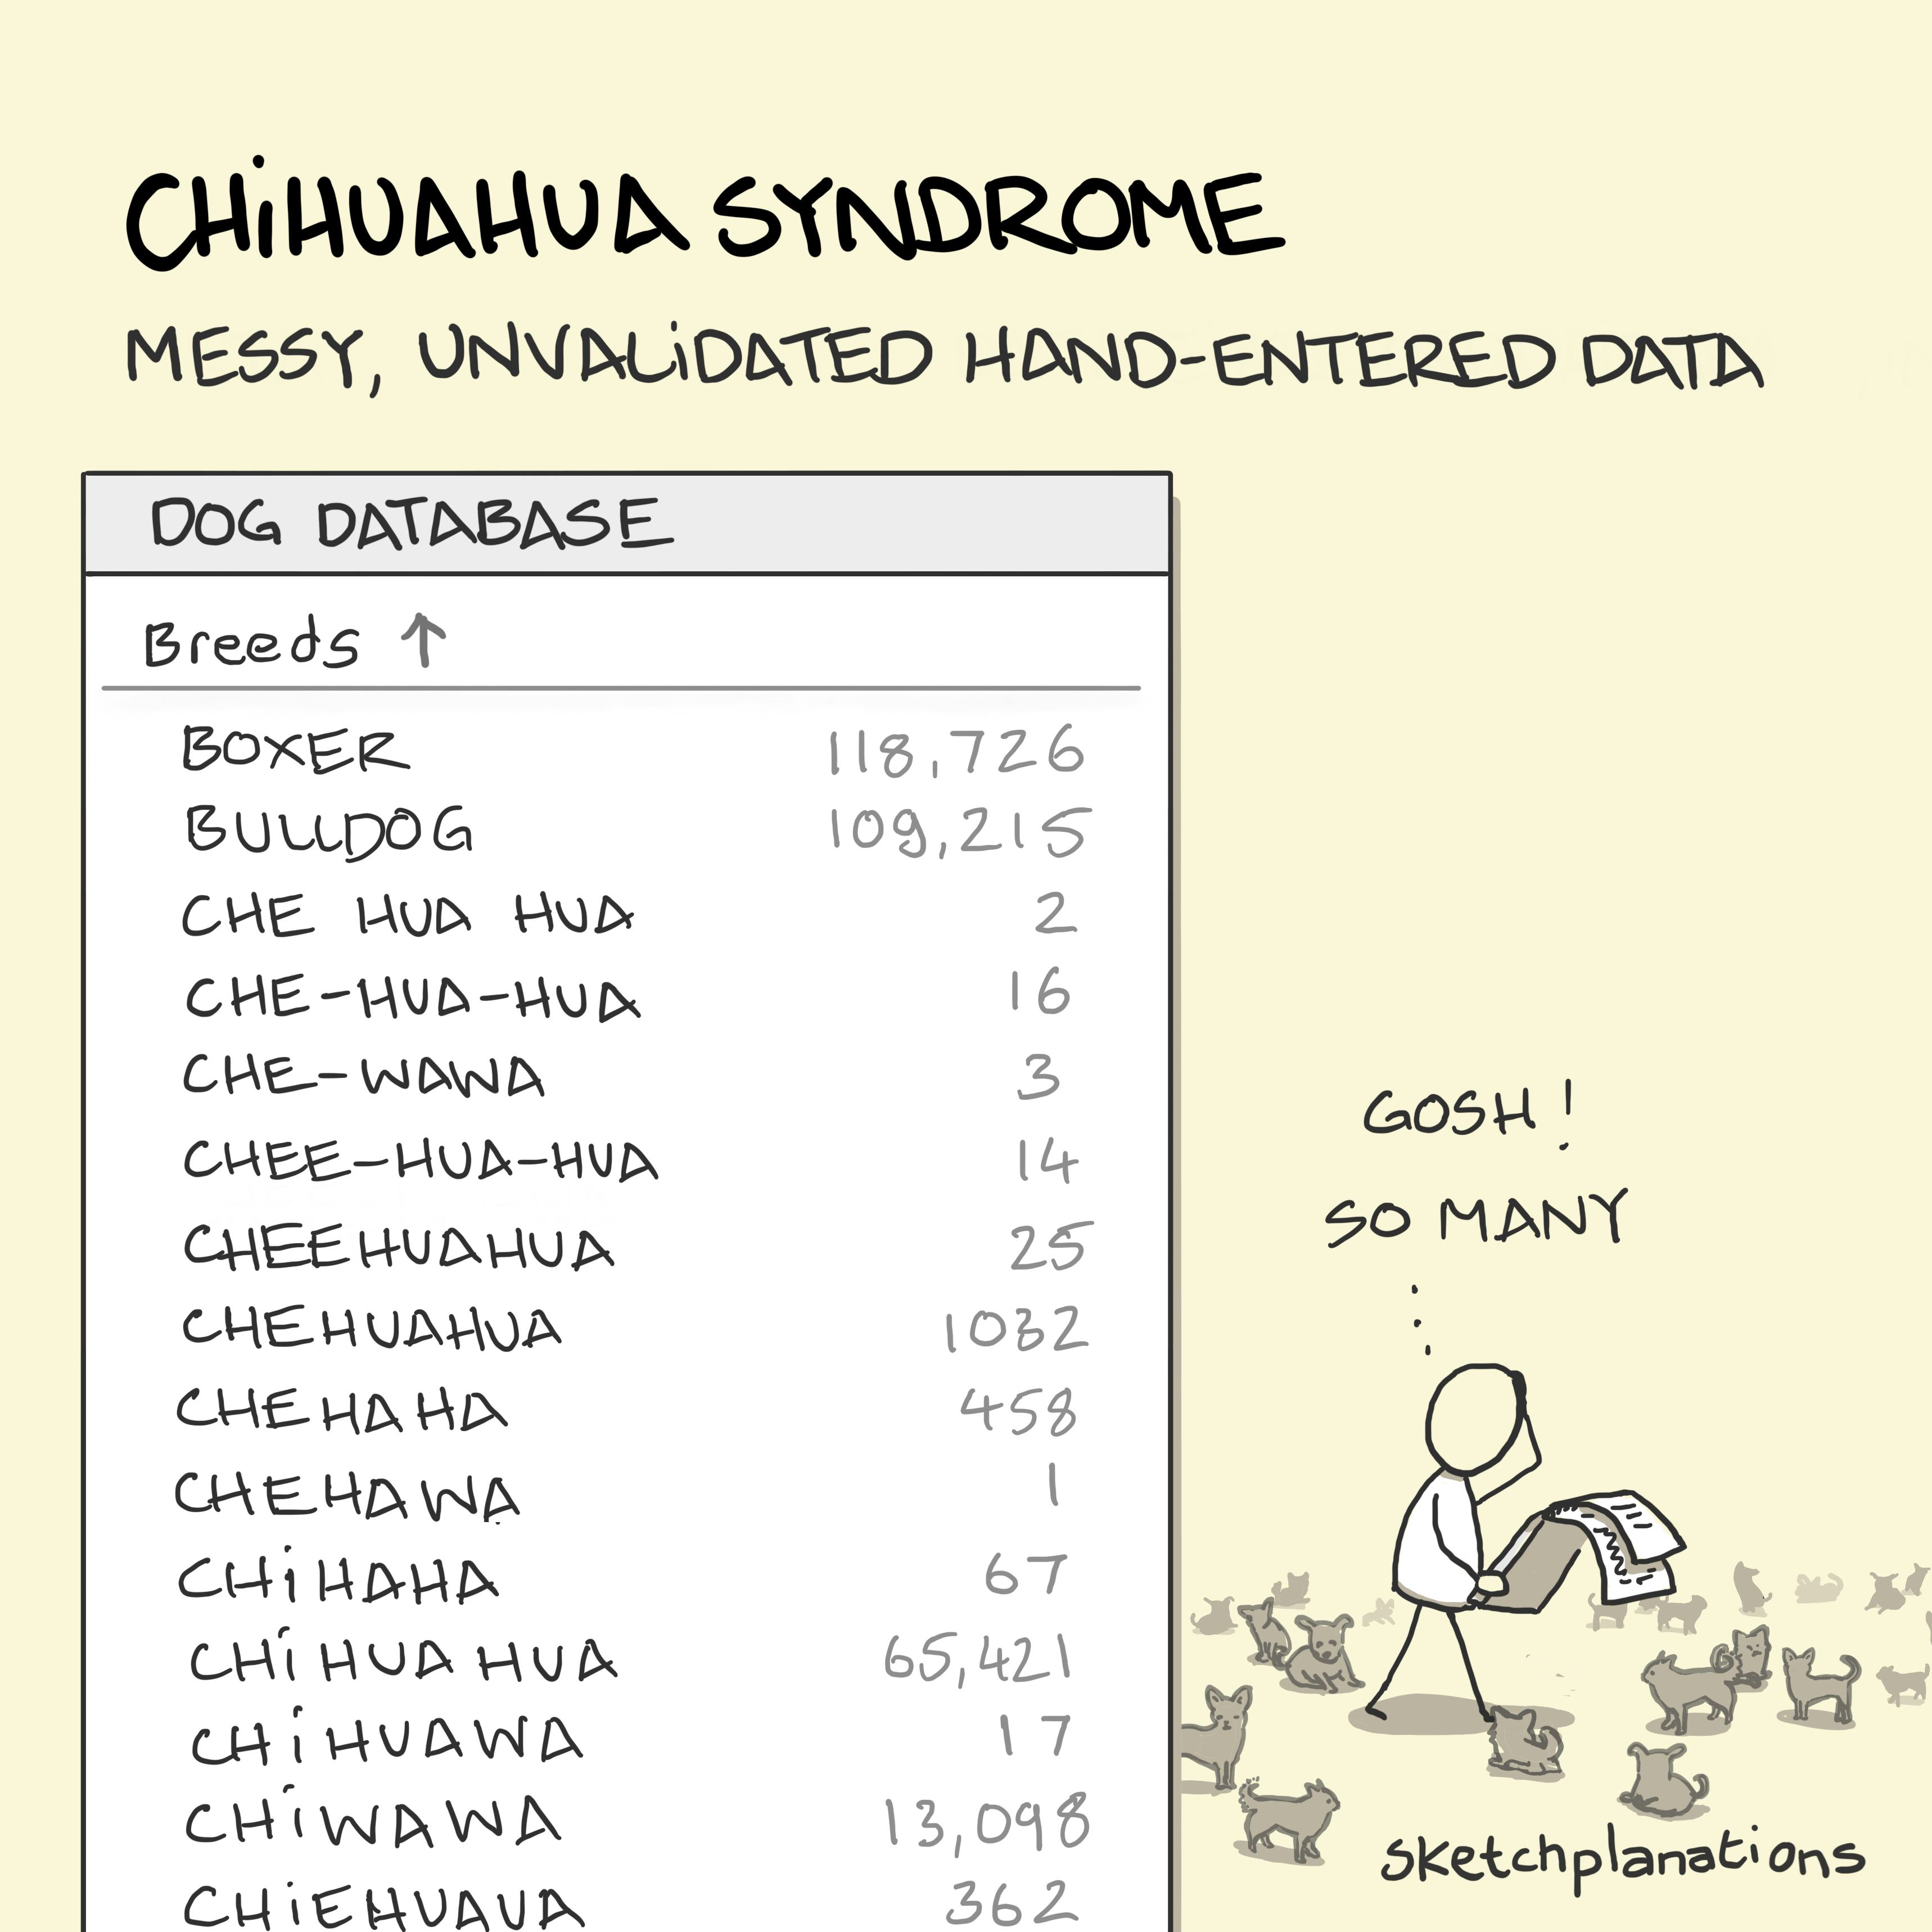 Chihuahua syndrome illustration: an analyst wonders at the number of dog breeds when most of them are misspellings of chihuahua